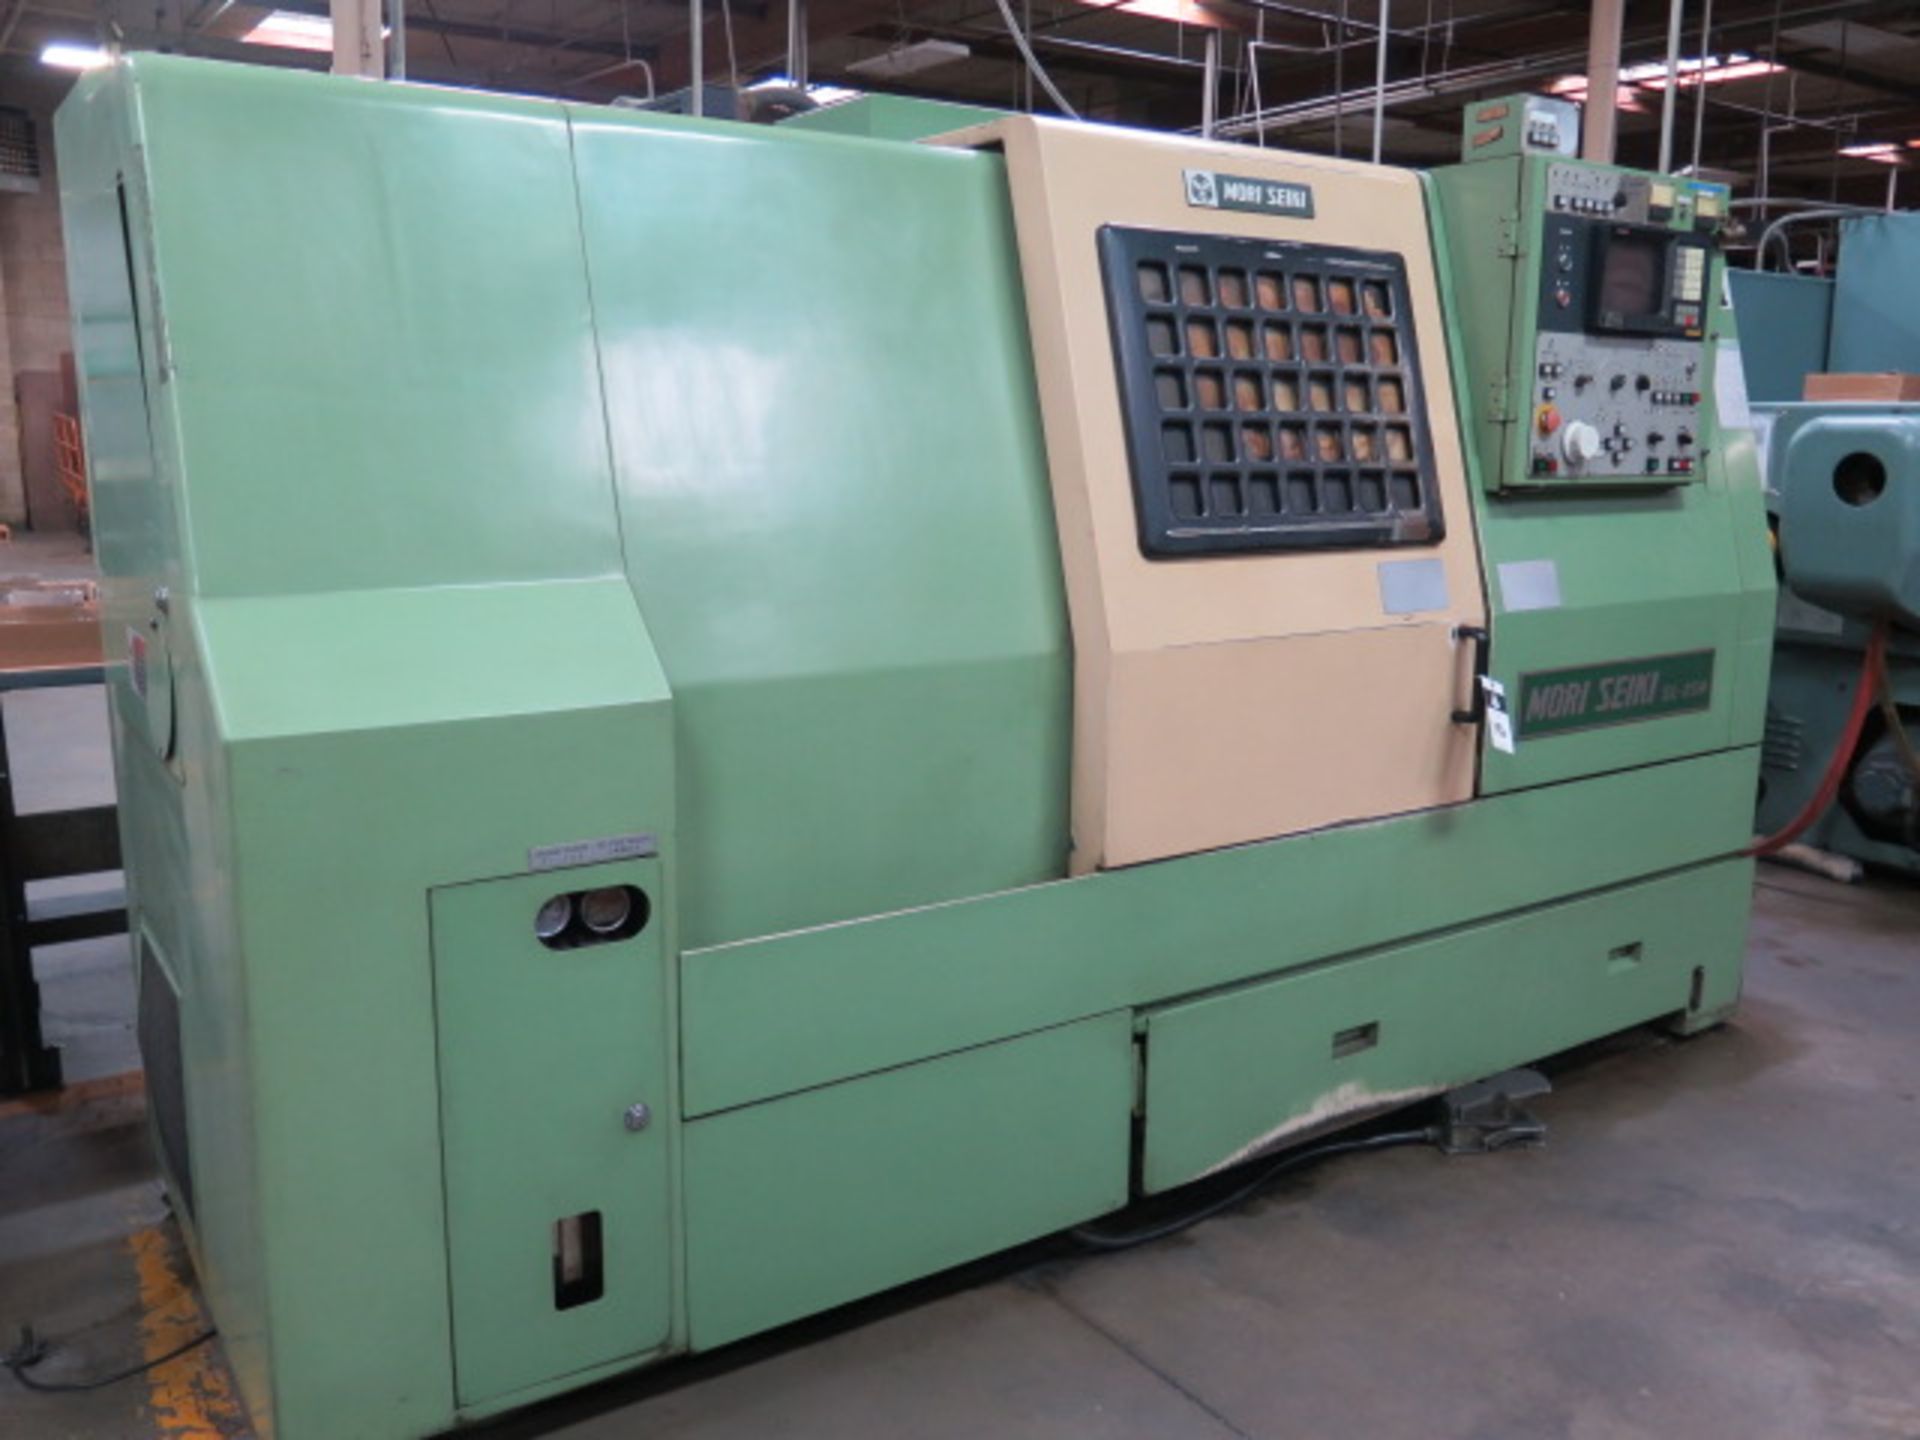 Mori Seiki SL-25MC5 CNC Turning Center s/n 335 w/ Fanuc 10T Controls, 12-Station Turret, SOLD AS IS - Image 2 of 12